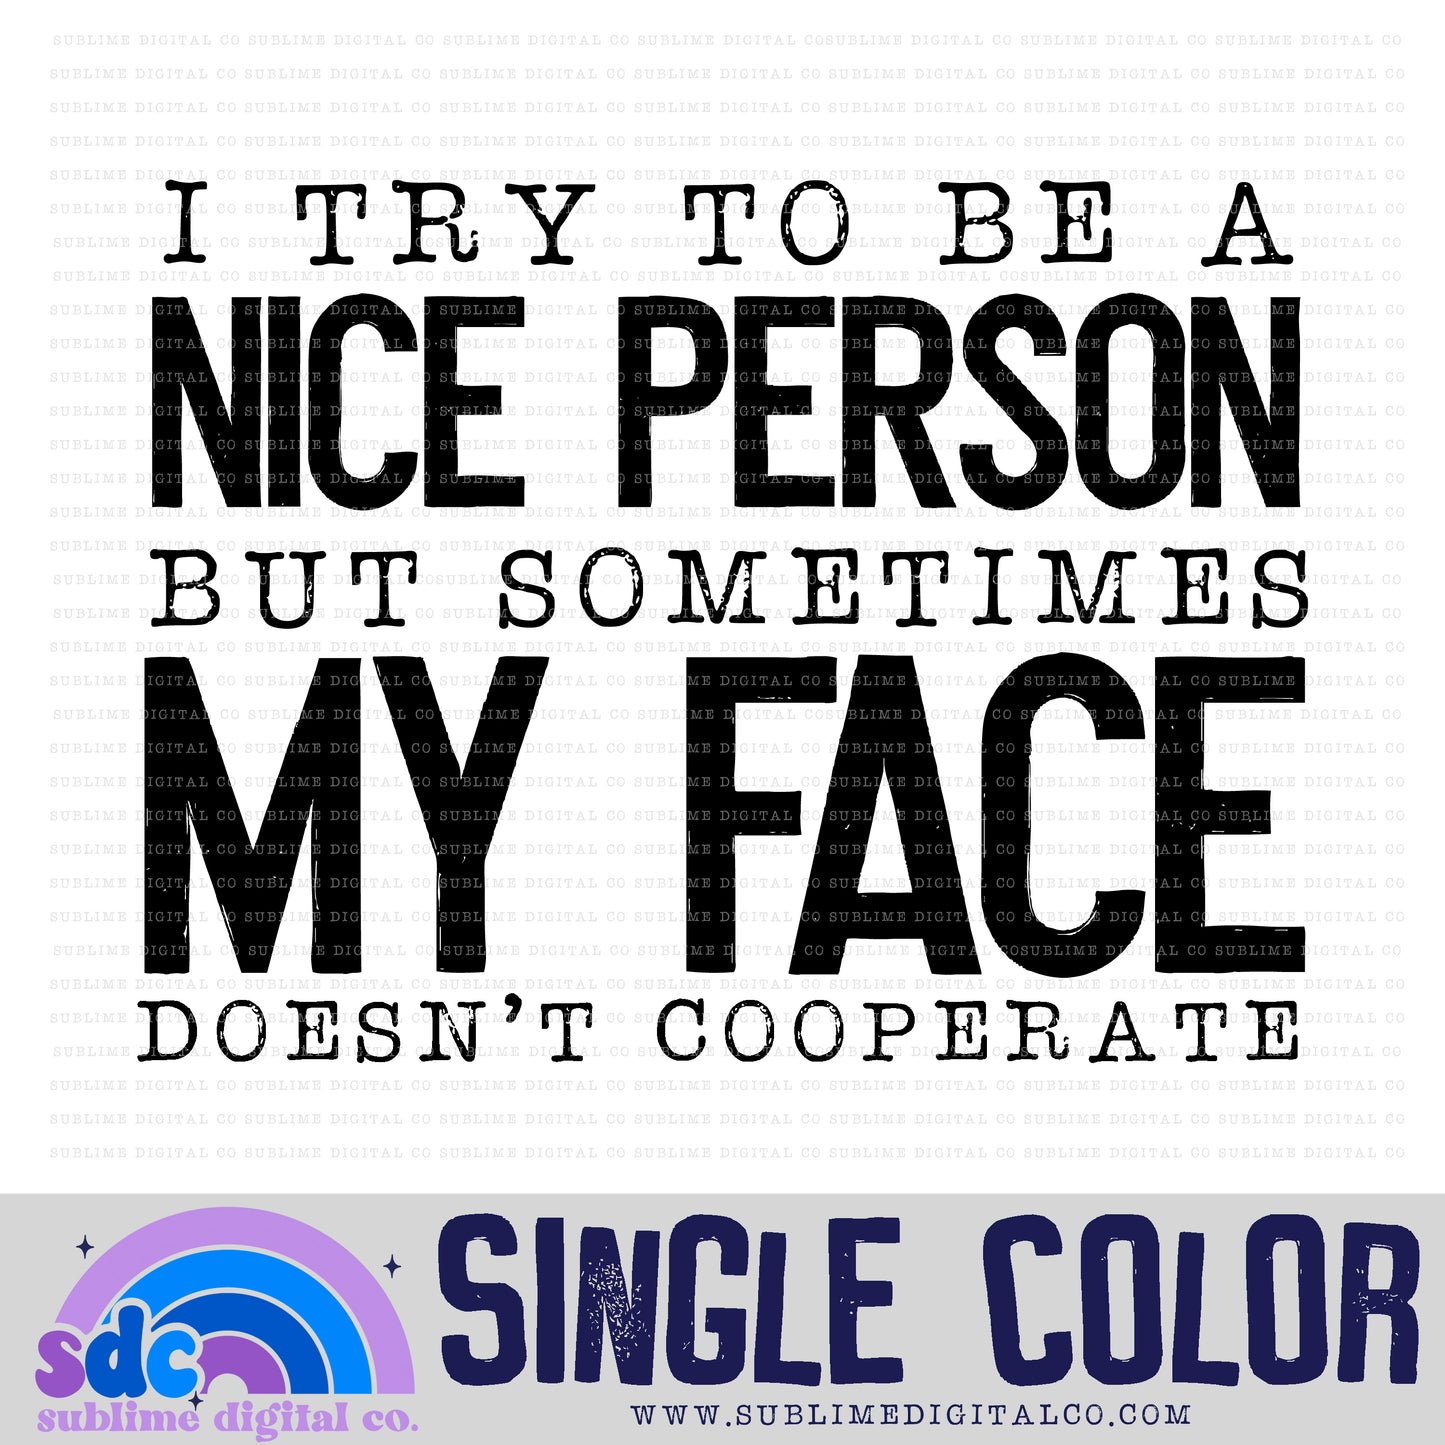 My Face • Single Color • Snarky • Instant Download • Sublimation Design